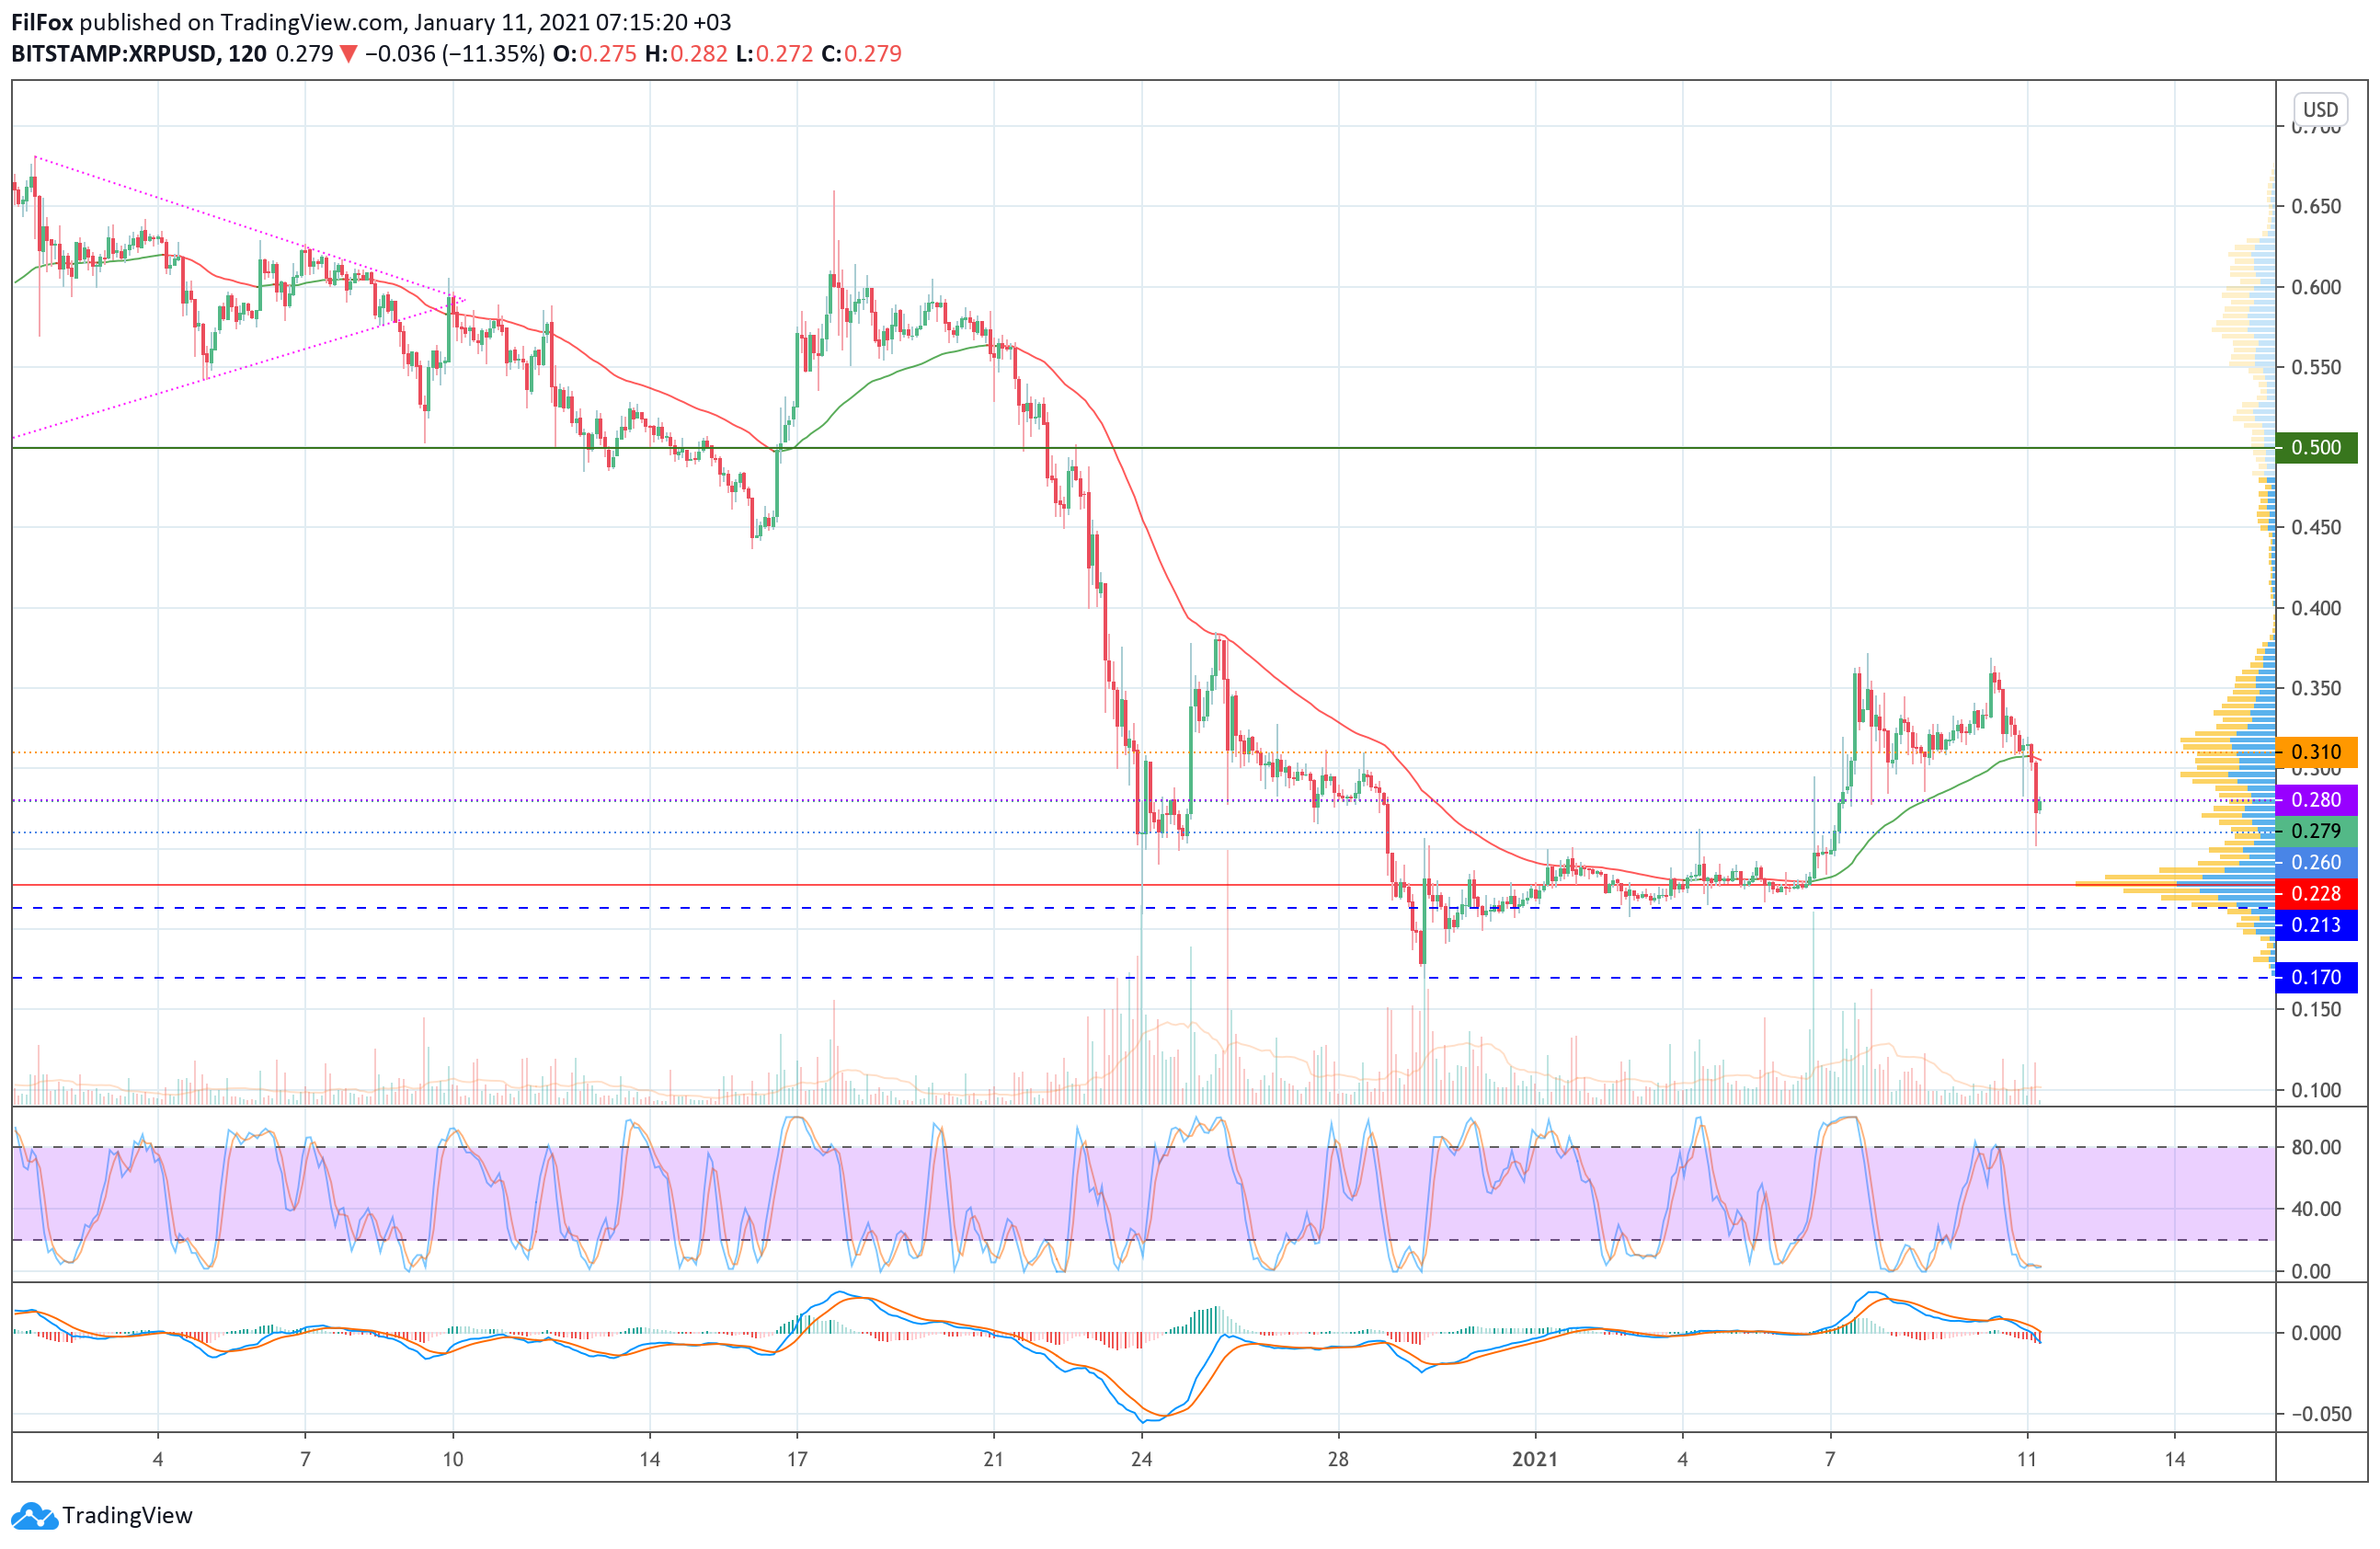 Analysis of prices for Bitcoin, Ethereum, Ripple for 01/11/2021